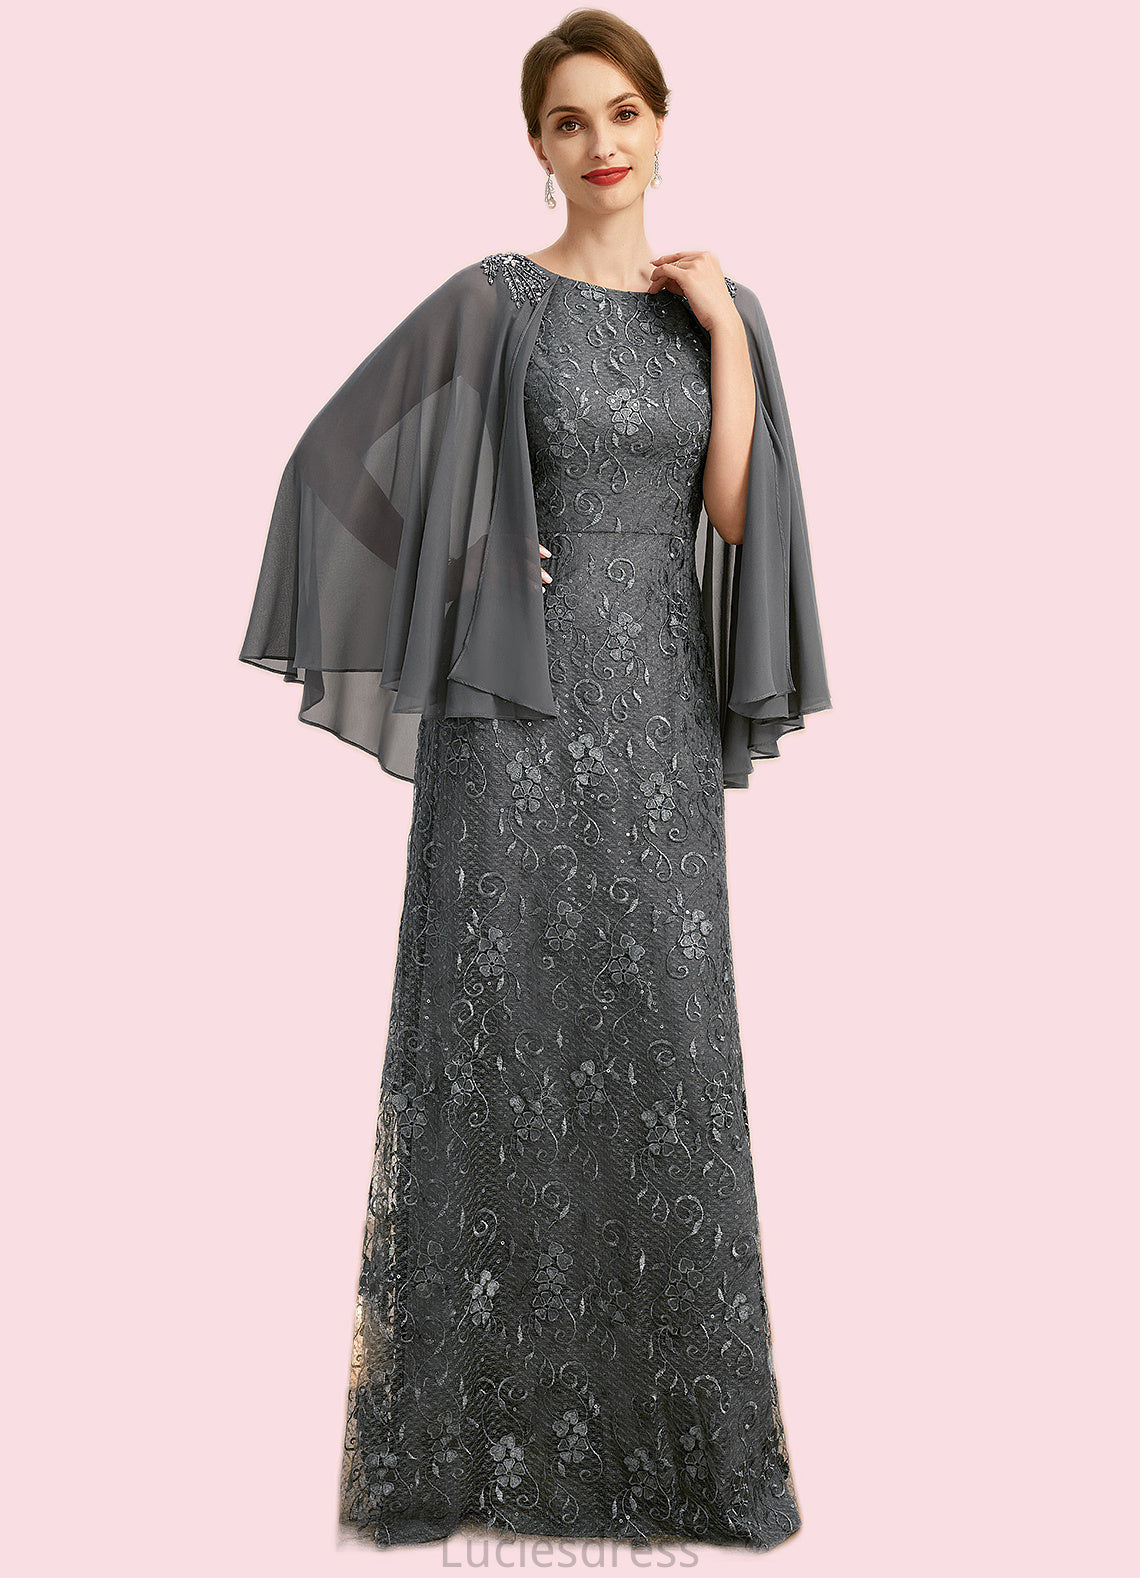 Skylar Sheath/Column Scoop Floor-Length Chiffon Lace Mother of the Bride Dress With Beading Sequins HFP0021962